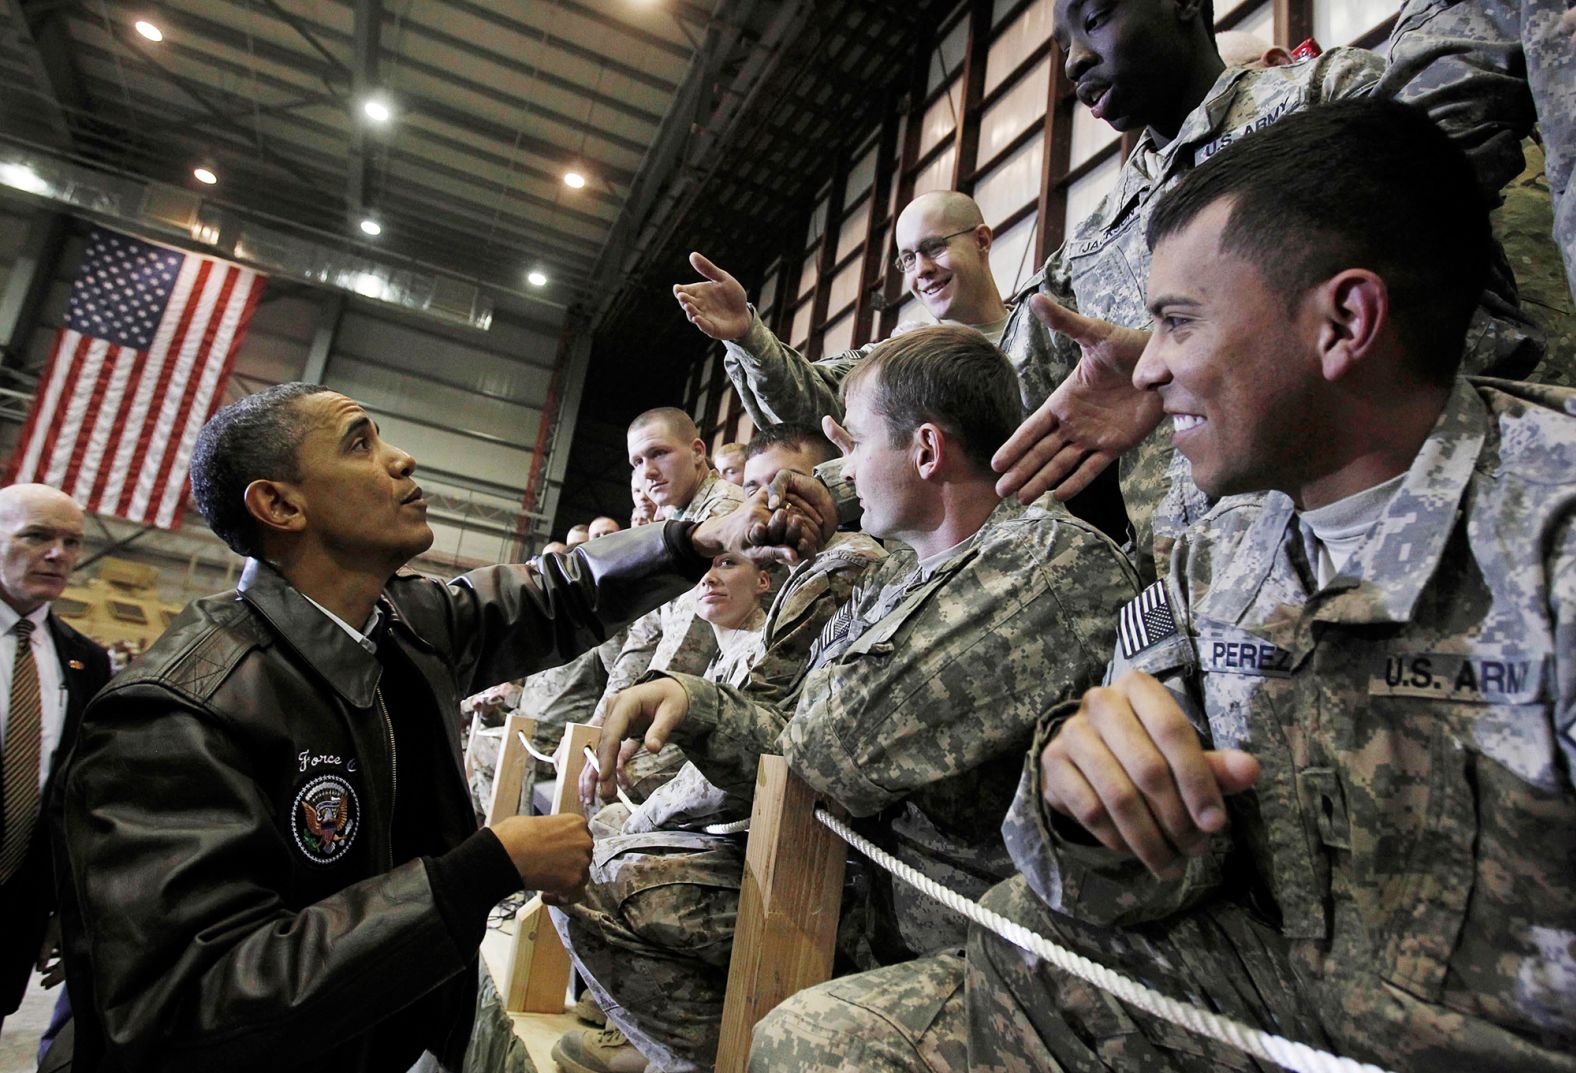 Obama meets with troops at the Bagram Air Base in Afghanistan in December 2010.